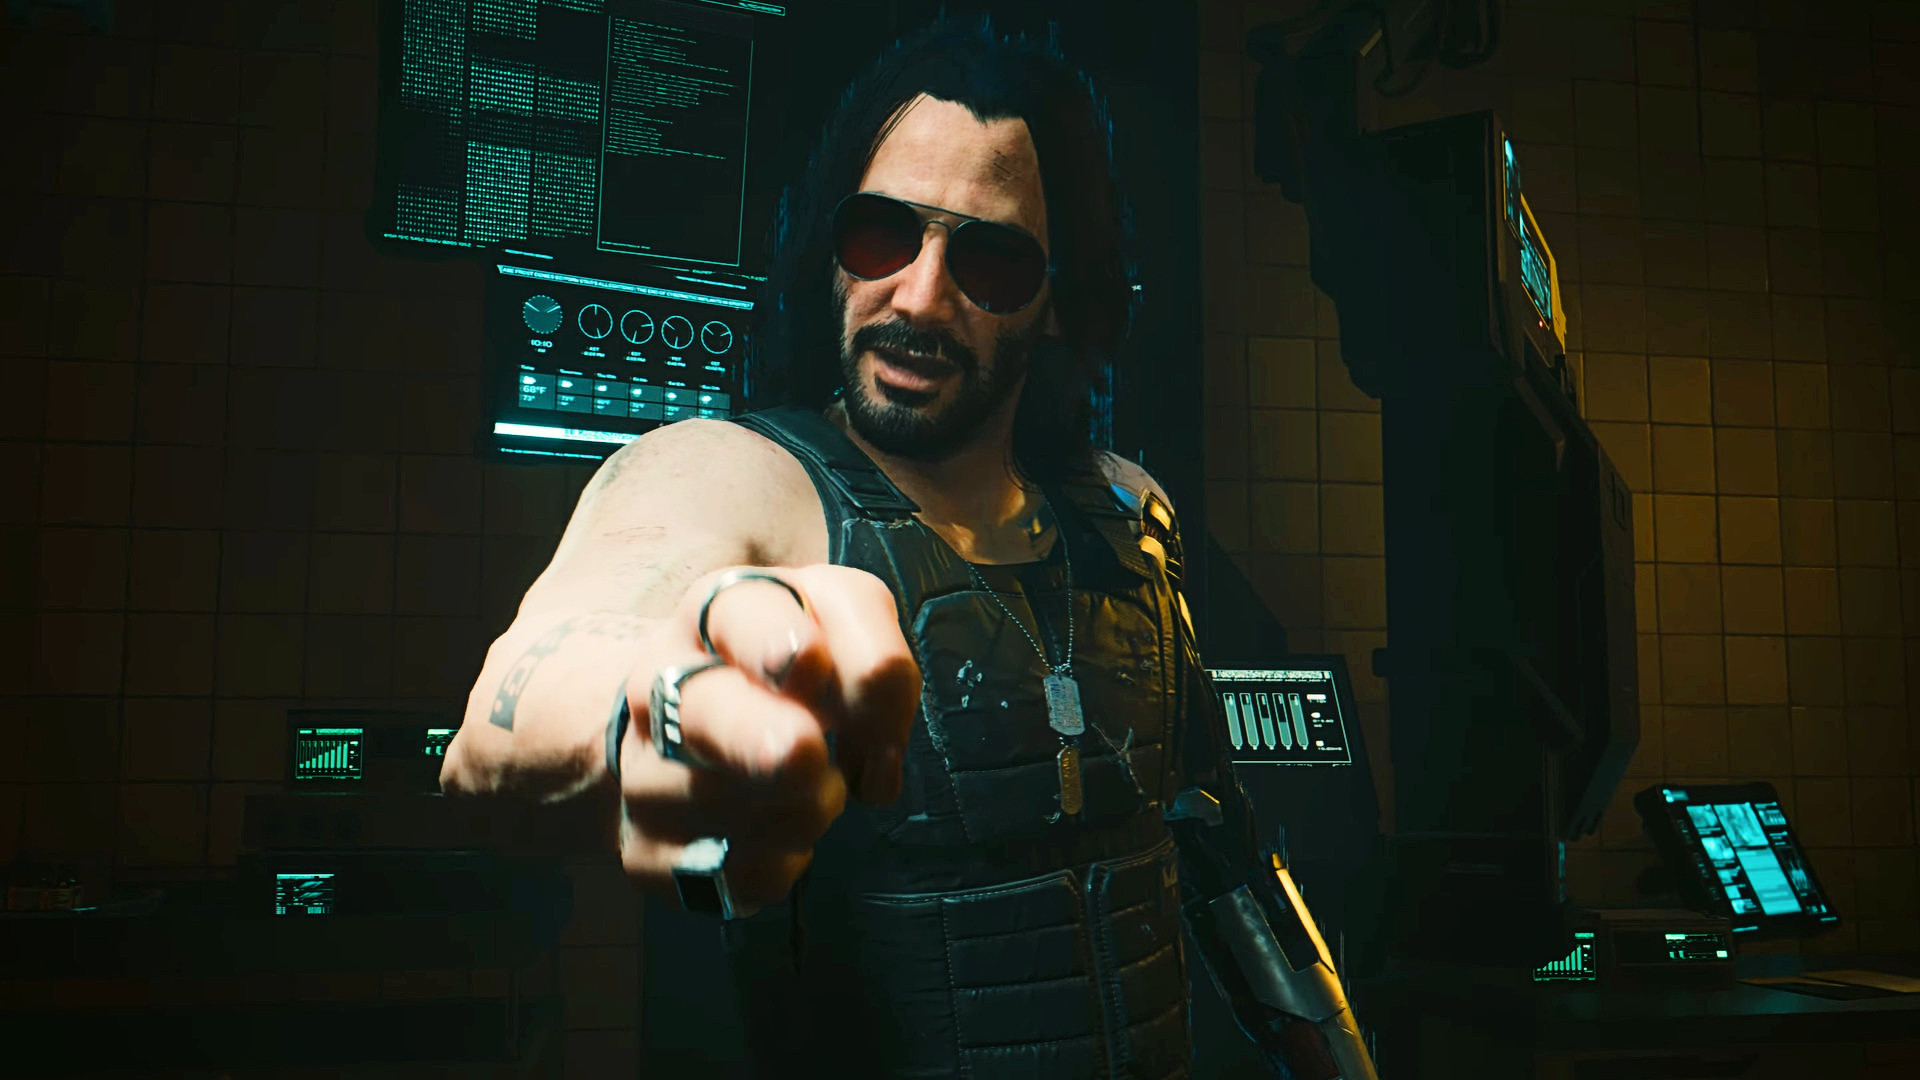 Cyberpunk 2077: specs and system requirements for PC